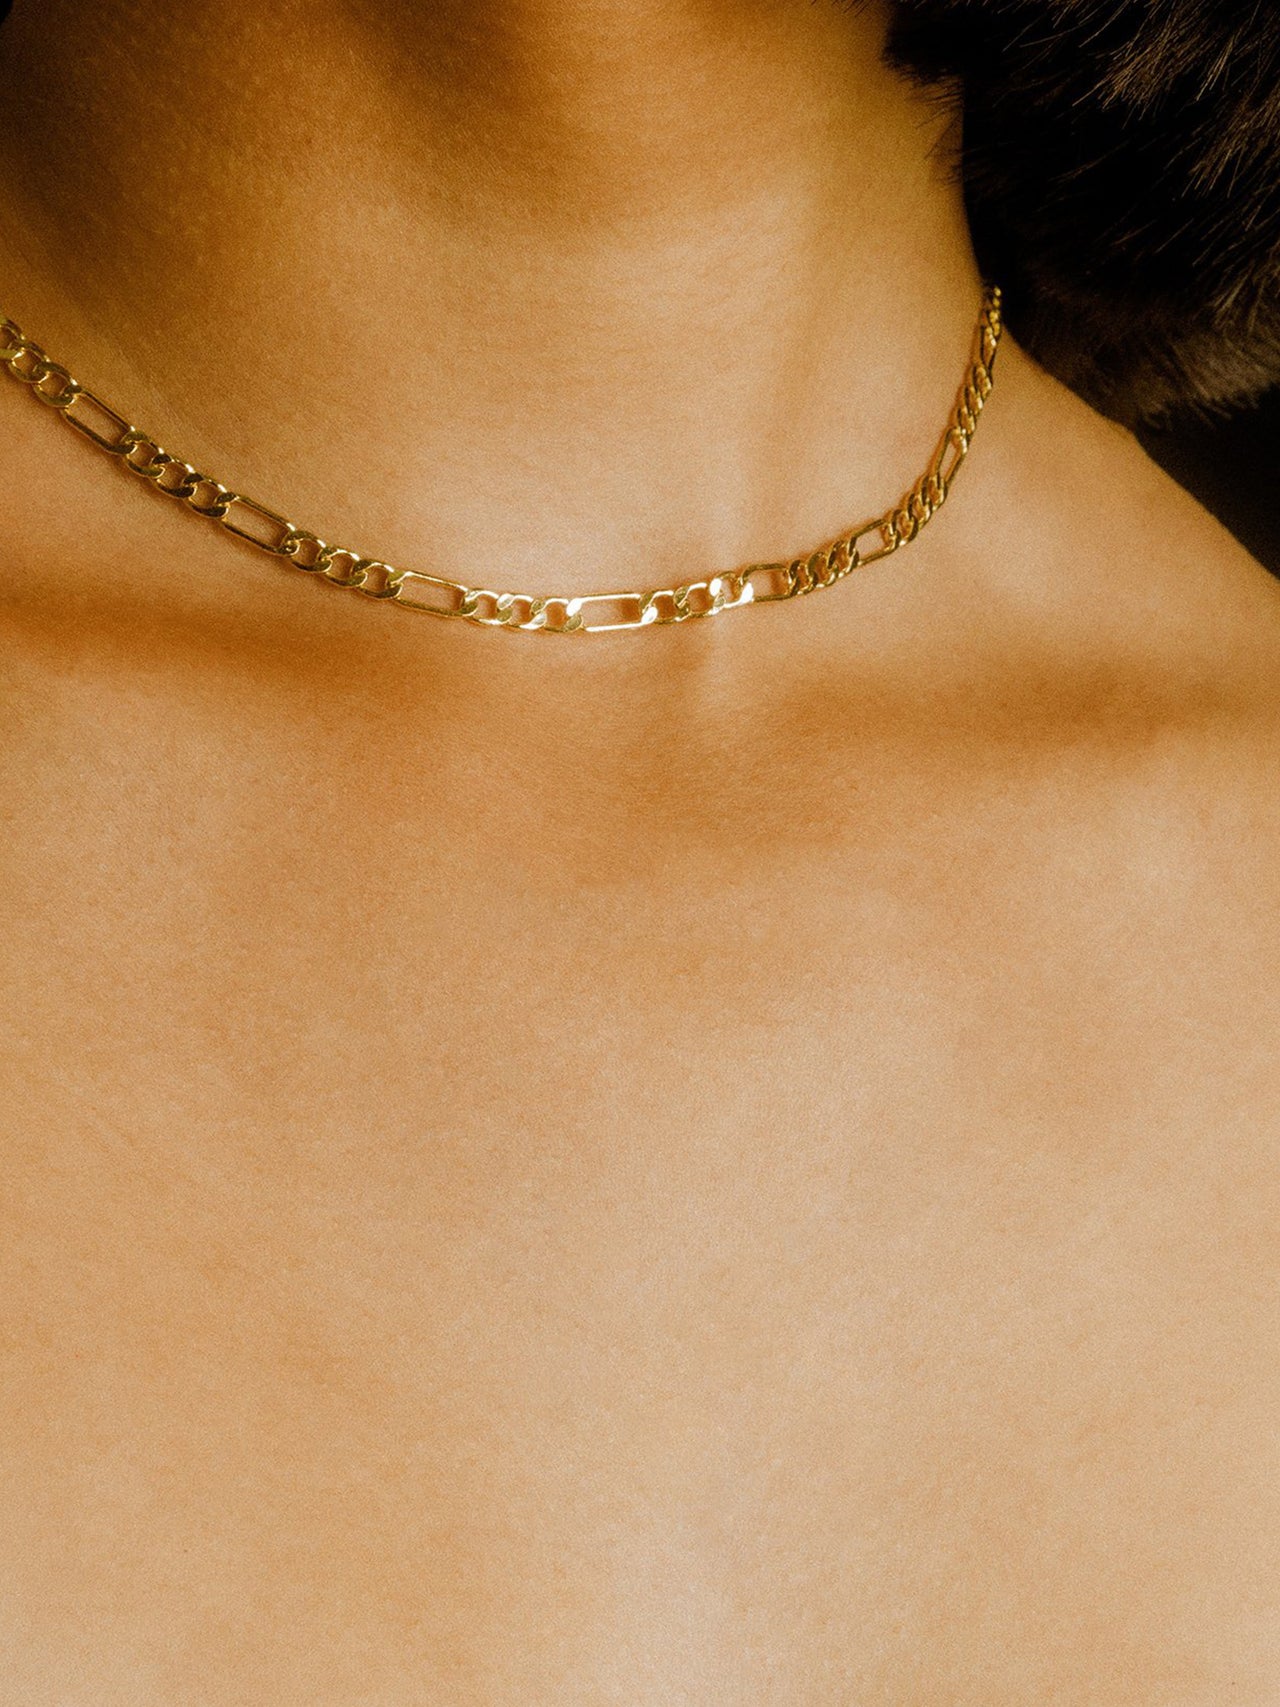 14KT Yellow Gold Figaro Chain shot on models neck.